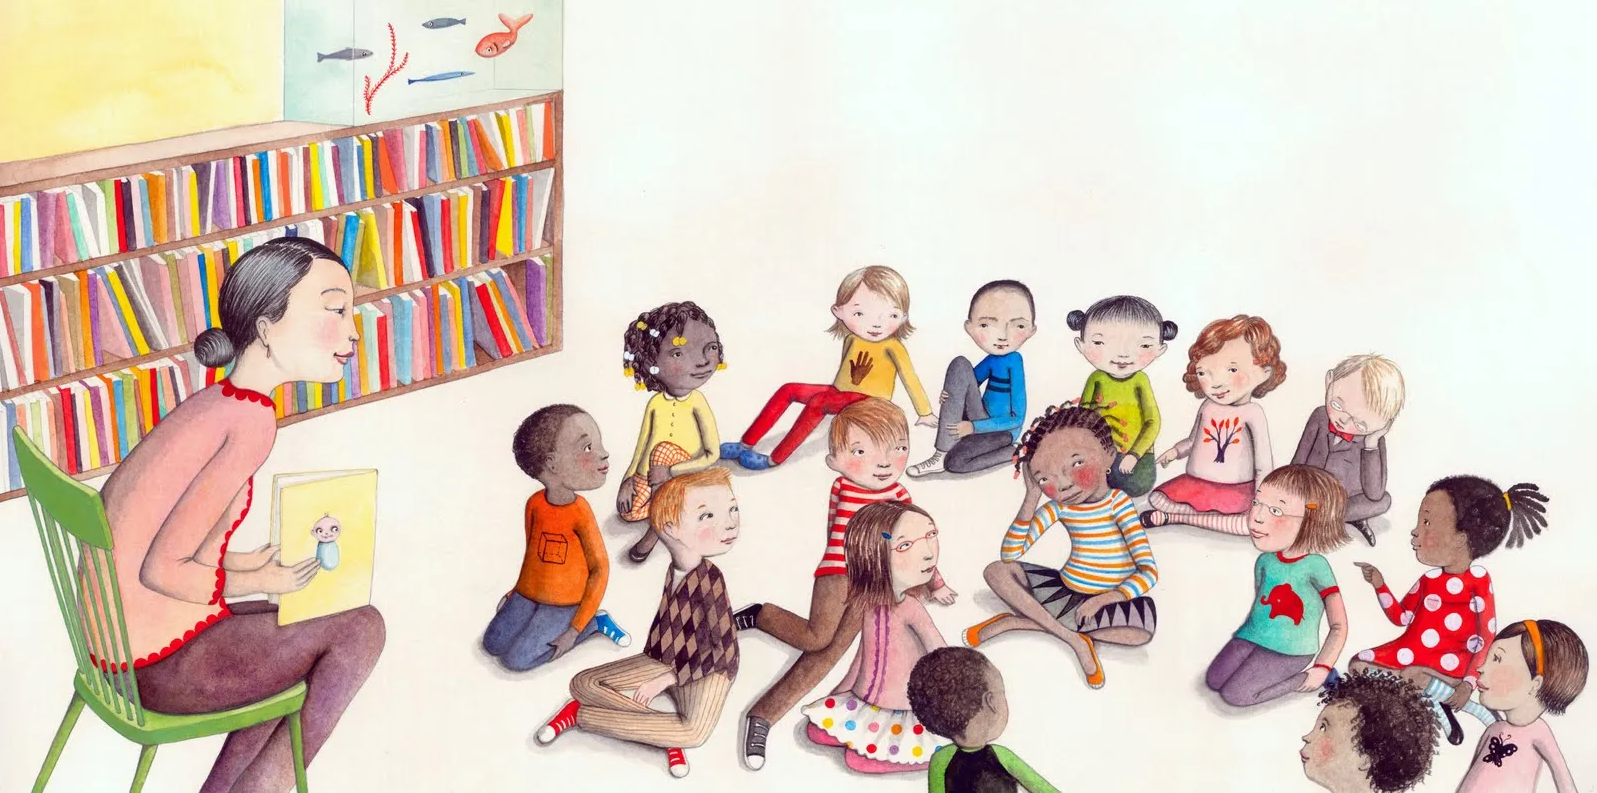 watercolor illustration of a woman reading to a diverse group of children seated on the floor